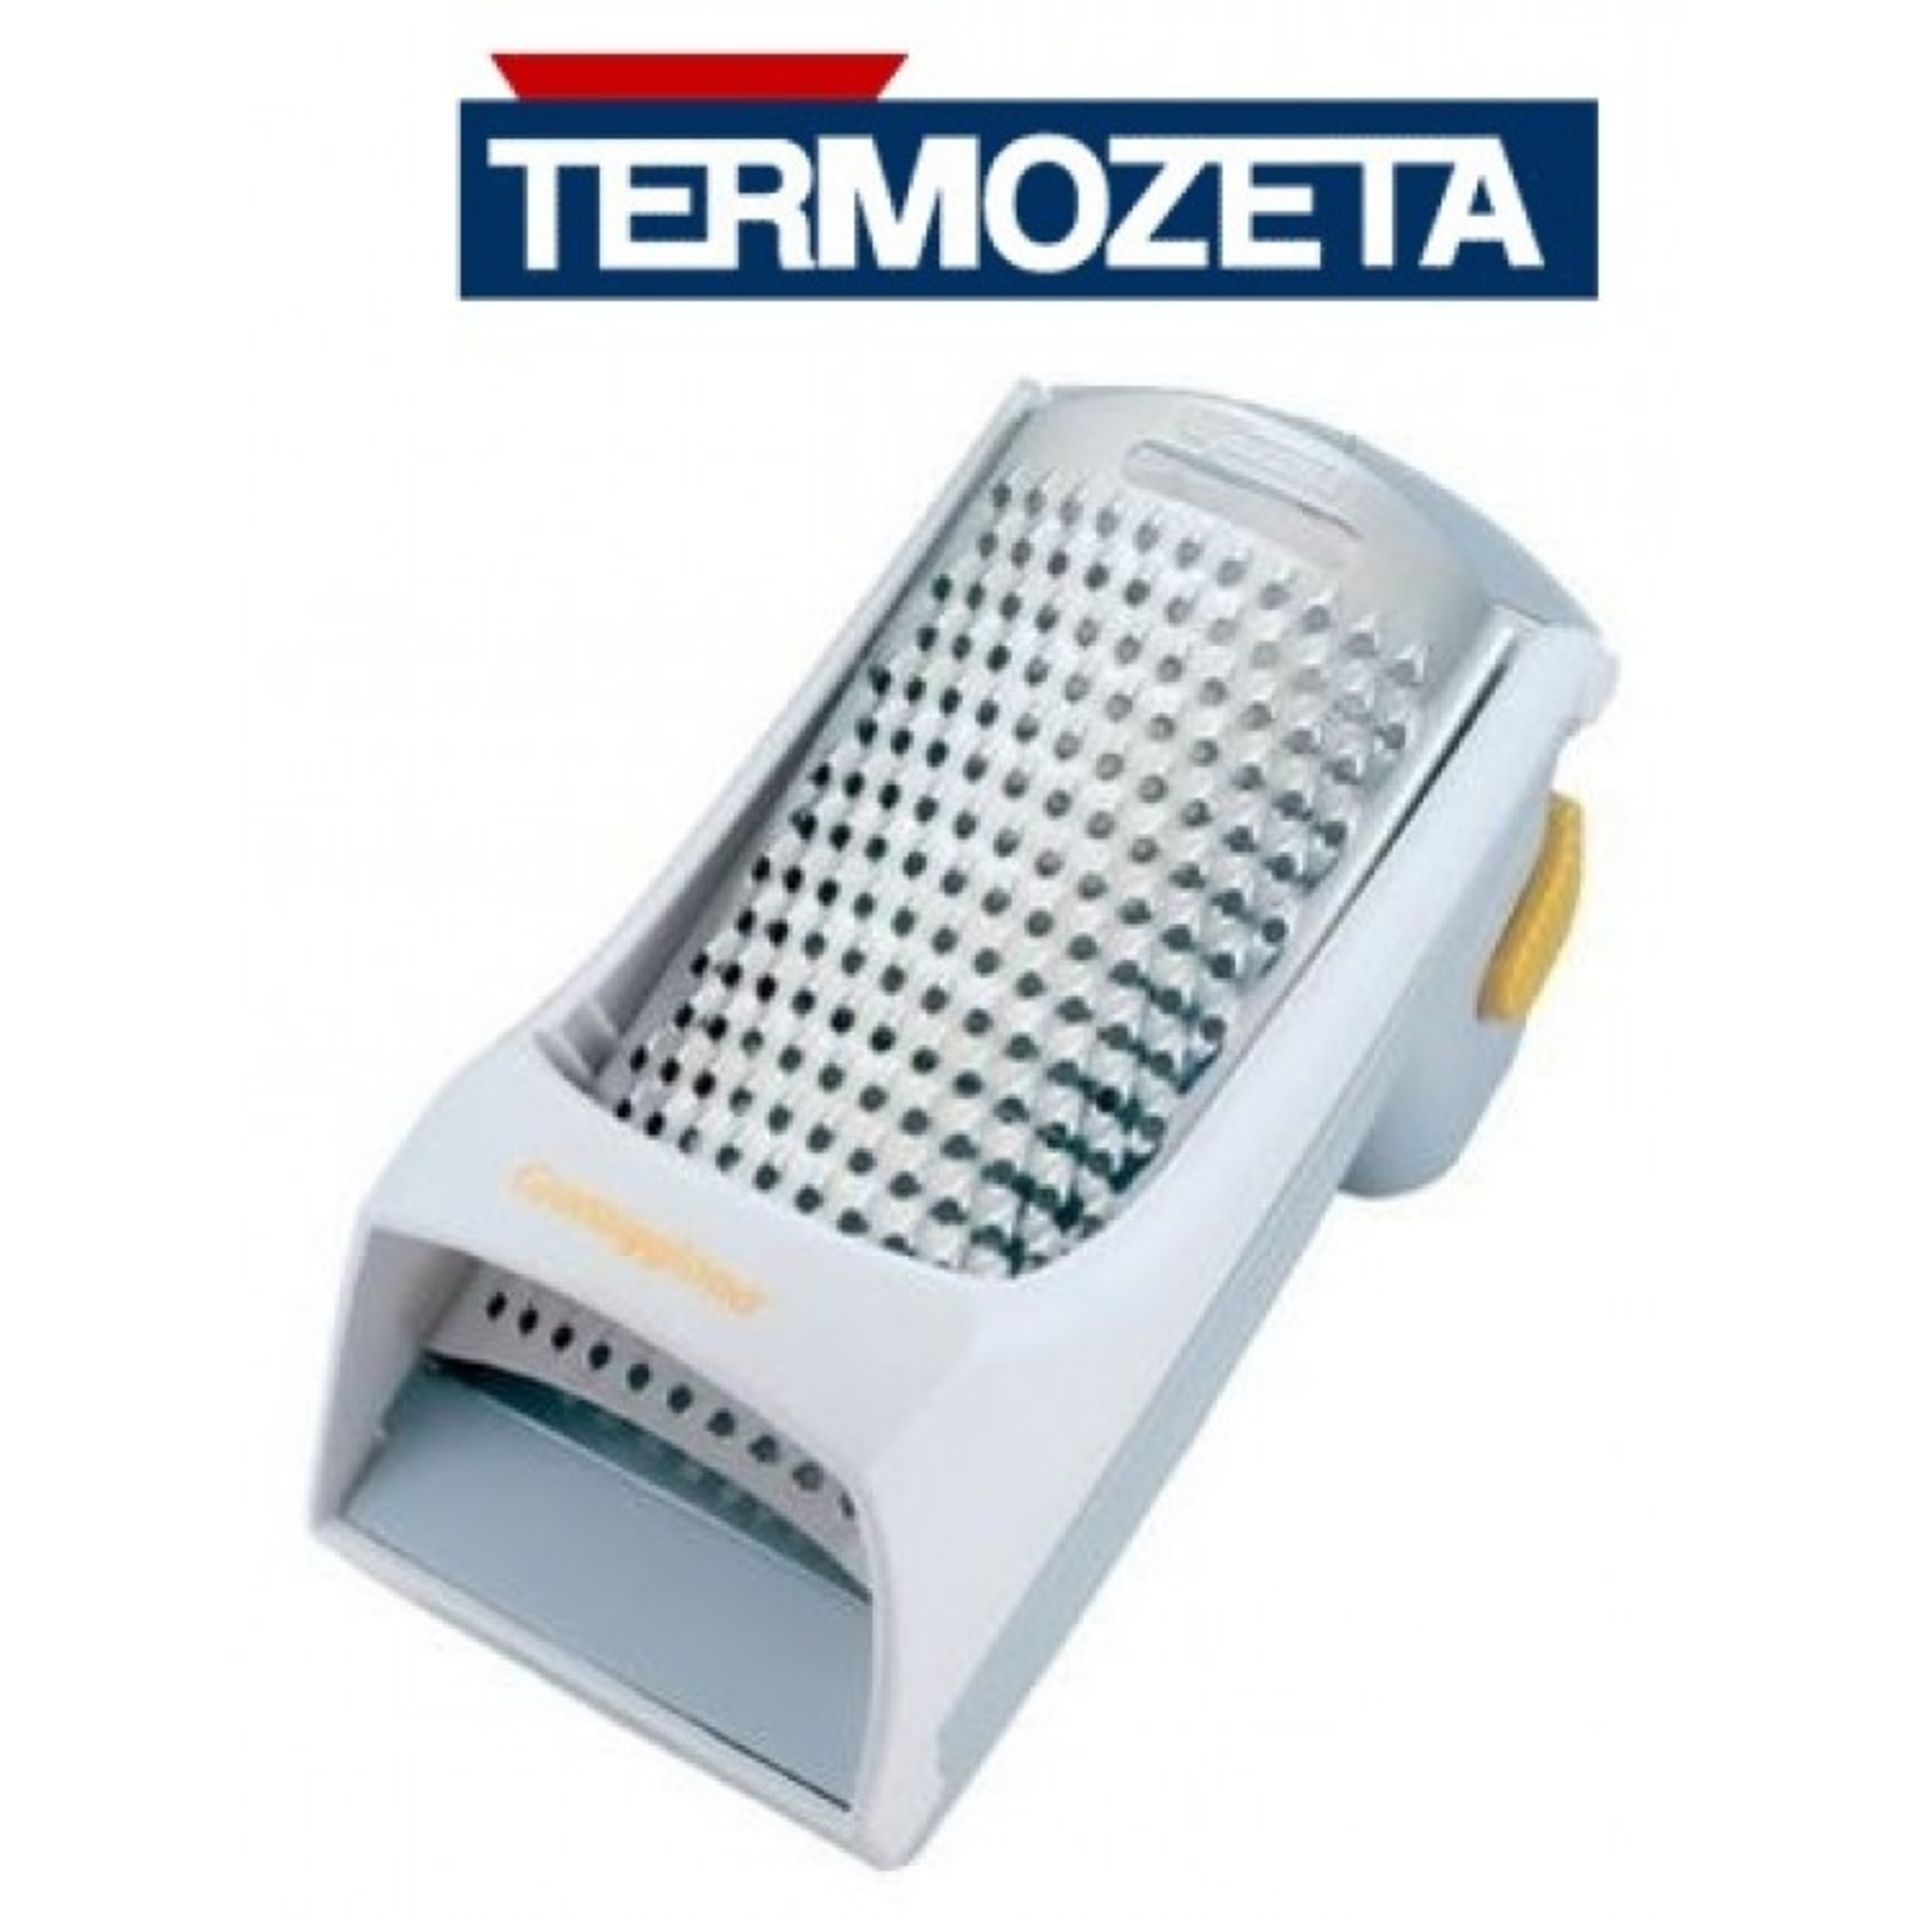 V Grade A Termozeta Rechargeable Cheese Grater-Stainless Steel Blade-Easy Clean-Size 18.5 X 8.5 X - Image 4 of 4